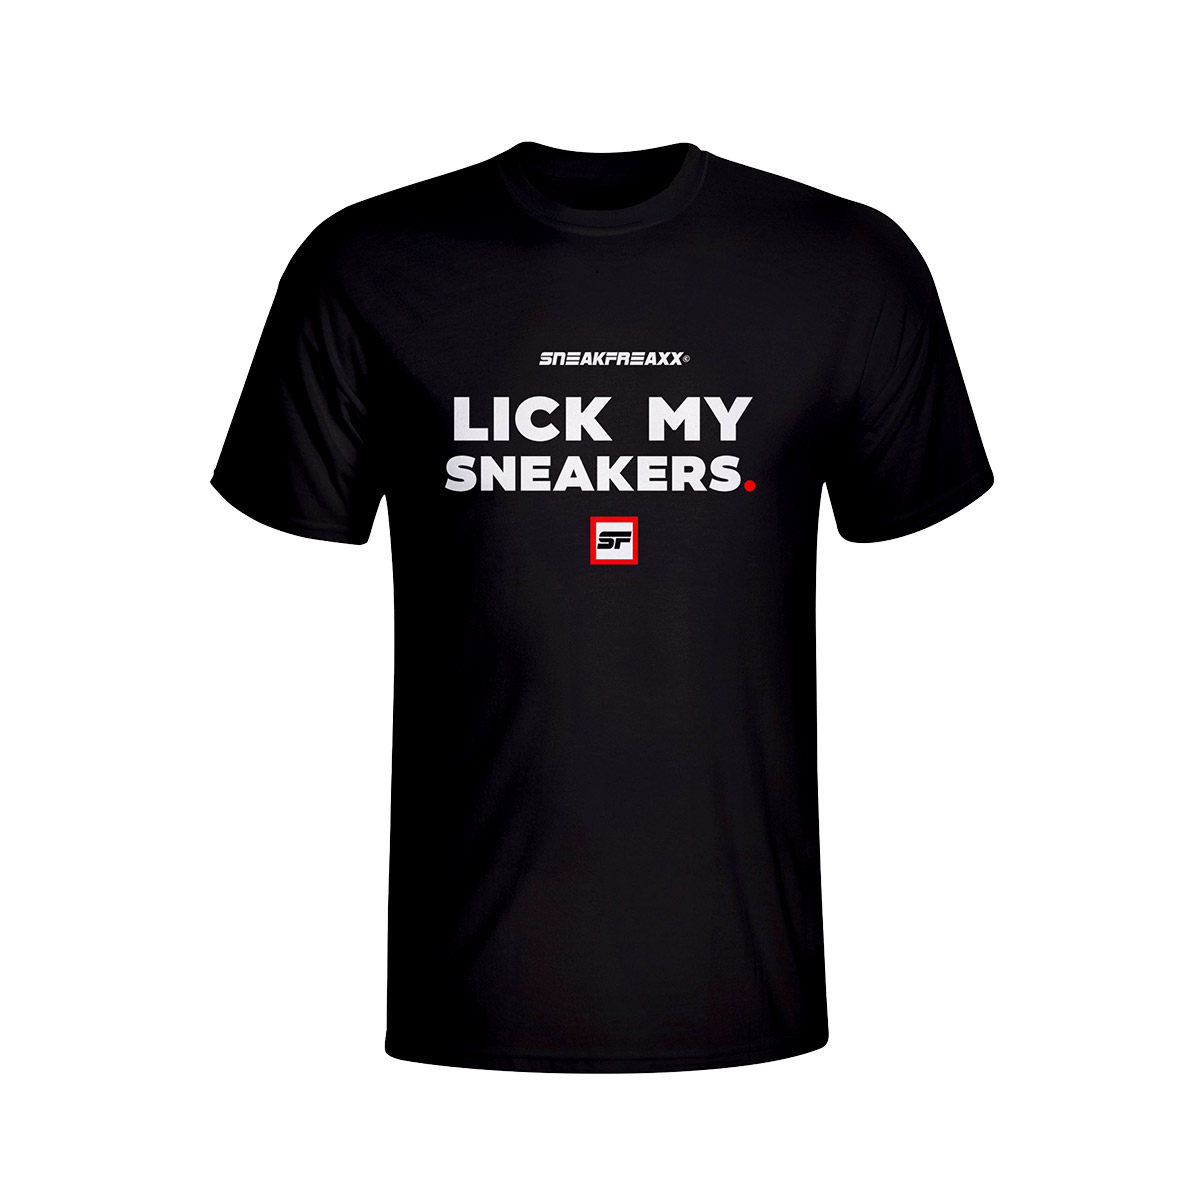 T-SHIRT - LICK MY SNEAKERS